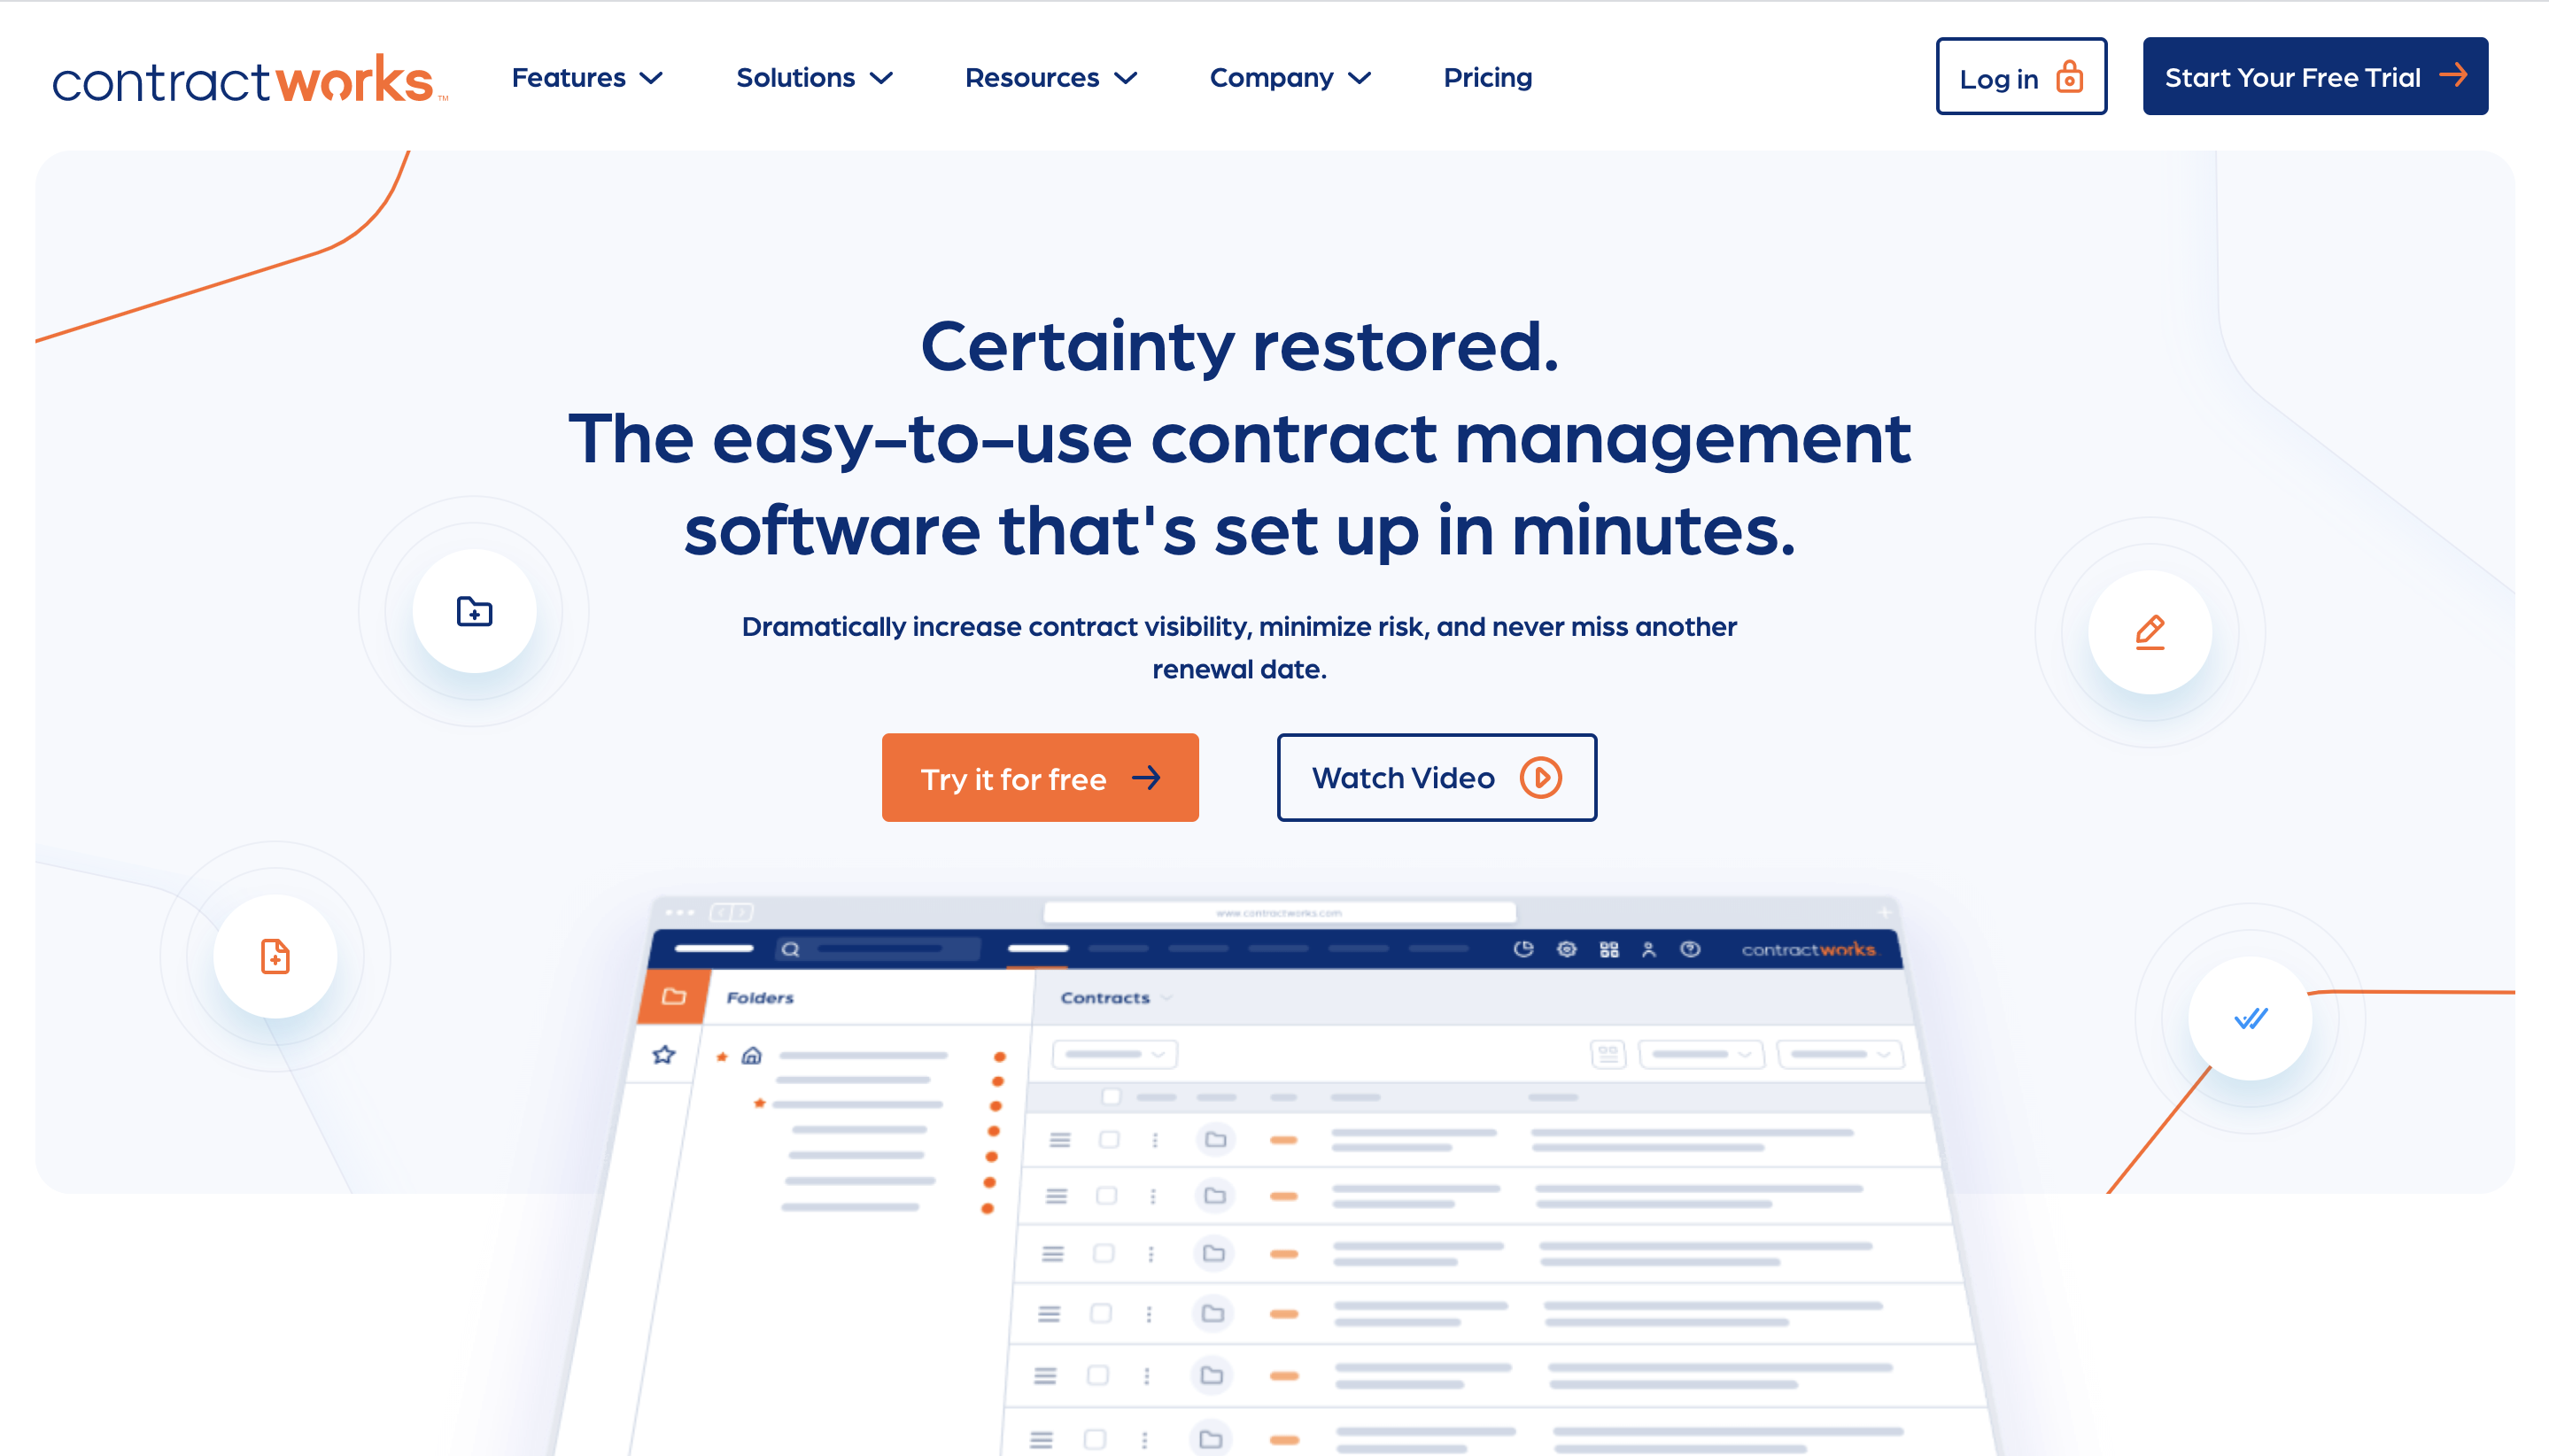 ContractWorks: Contract Management Software